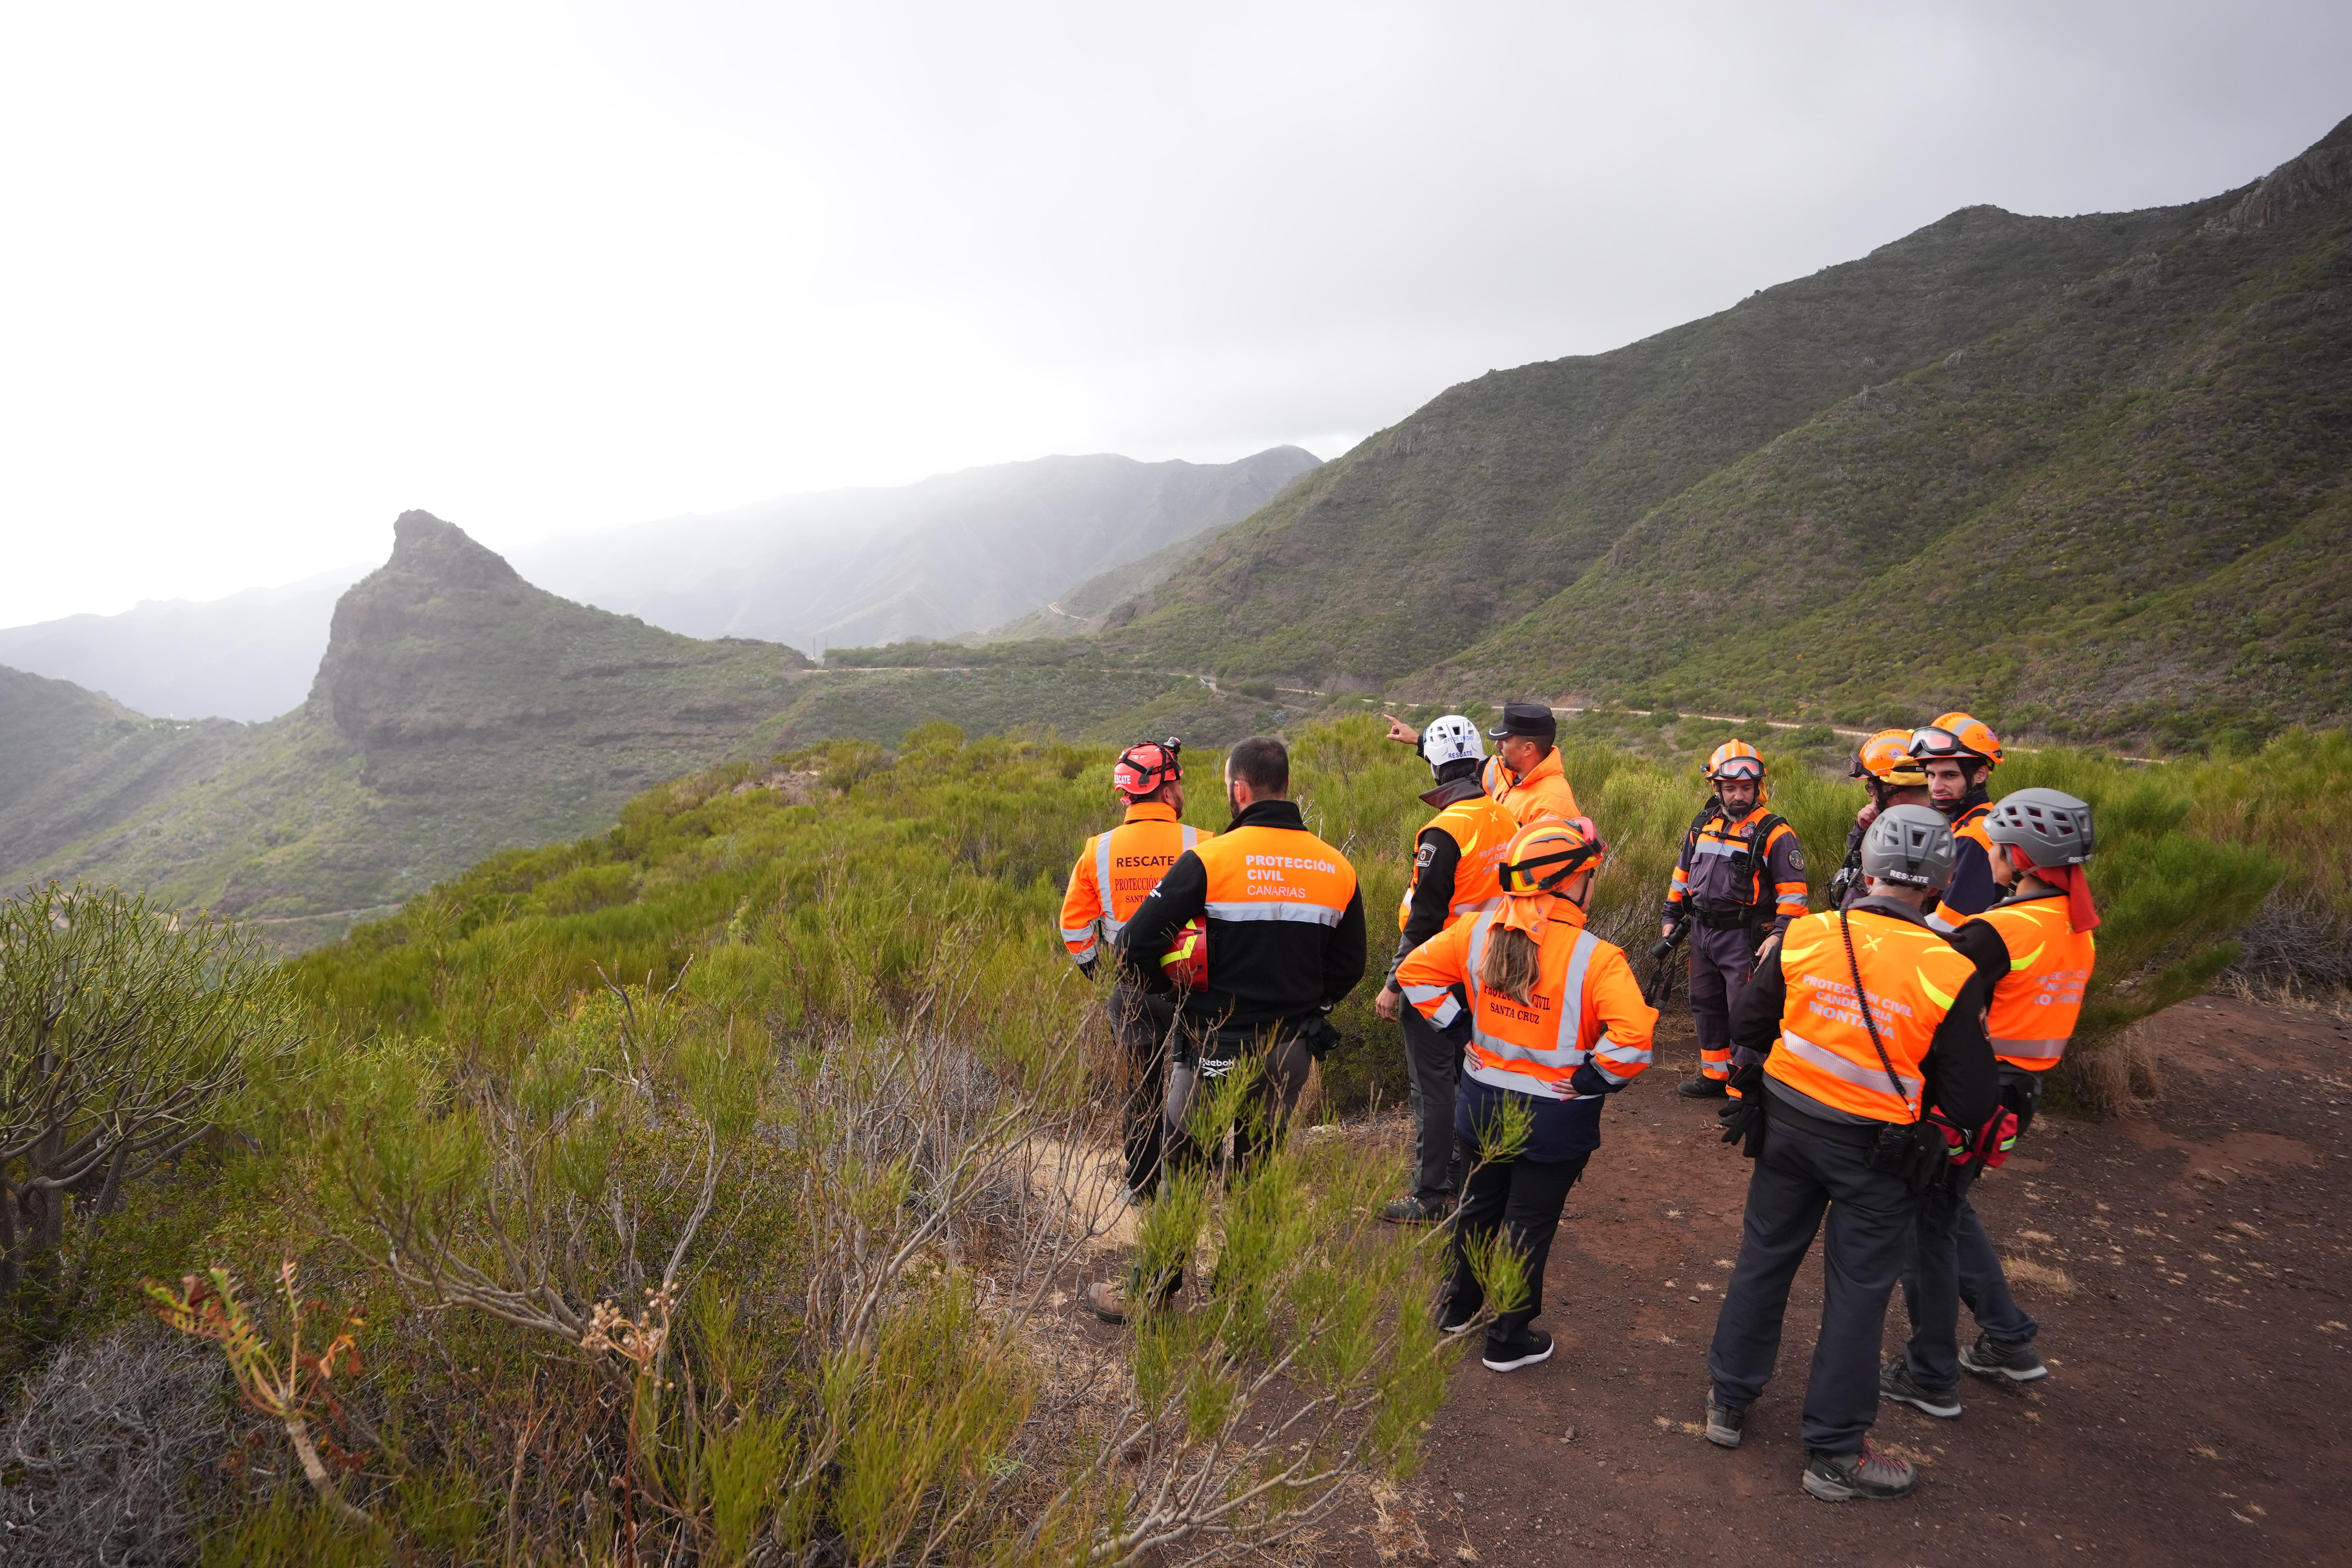 A group of search and rescue workers near to the village of Masca, Tenerife, where the search for missing British teenager Jay Slater, 19, from Oswaldtwistle, Lancashire, continues (James Manning/PA)